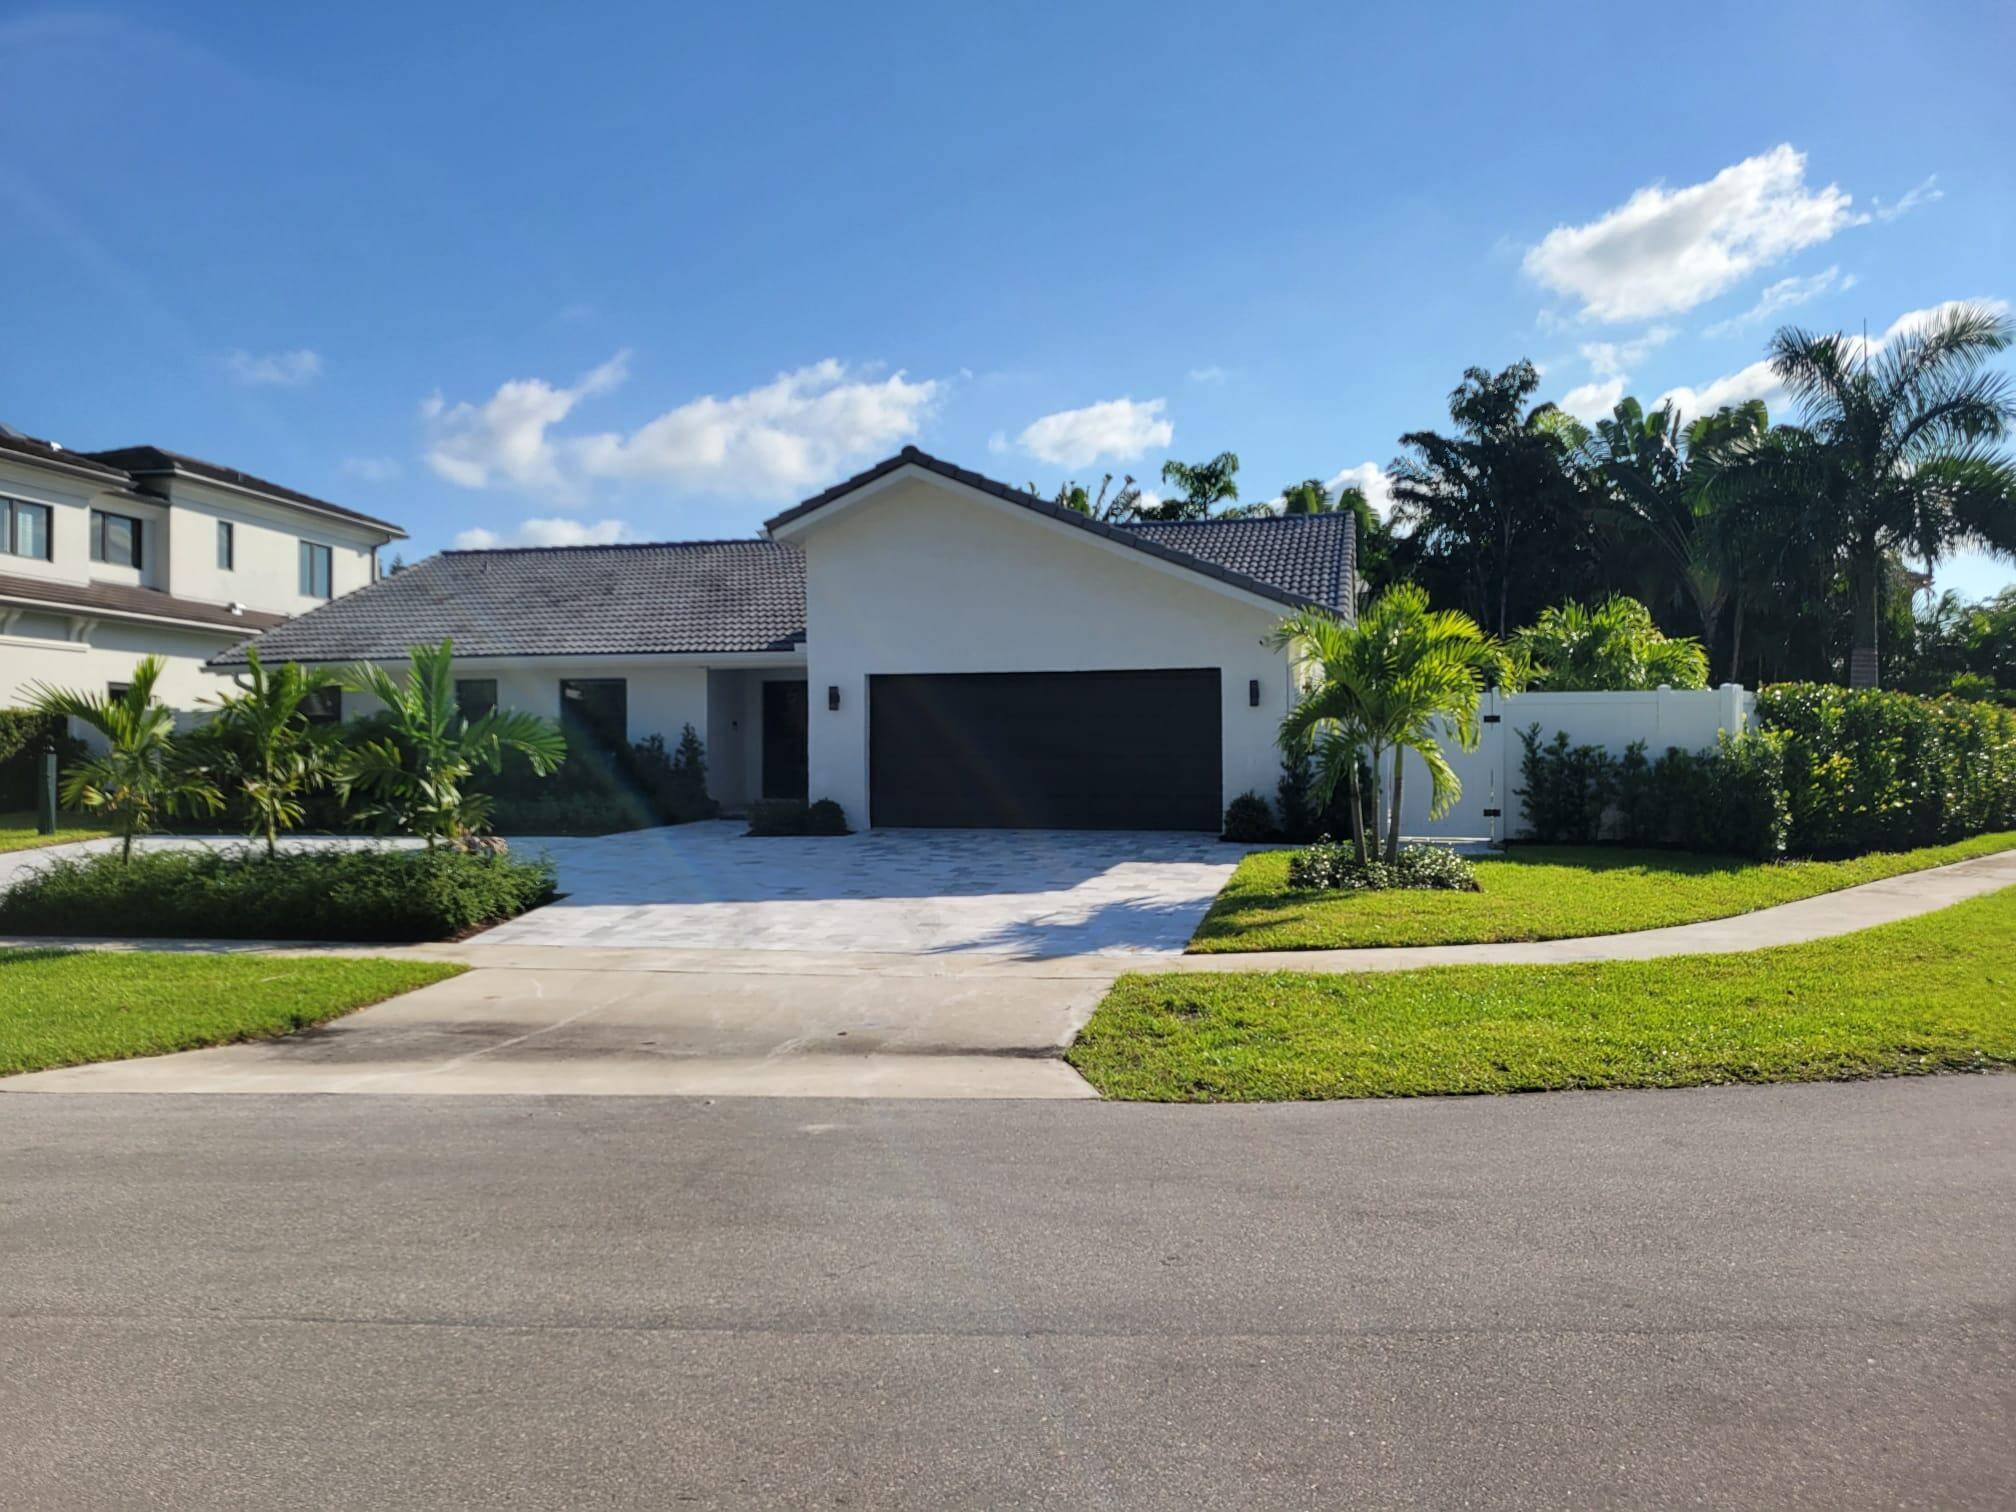 This house is a luxurious and modern masterpiece, built with high end materials and designed with meticulous attention to detail, featuring porcelain tile flooring throughout, adding a touch of elegance ...